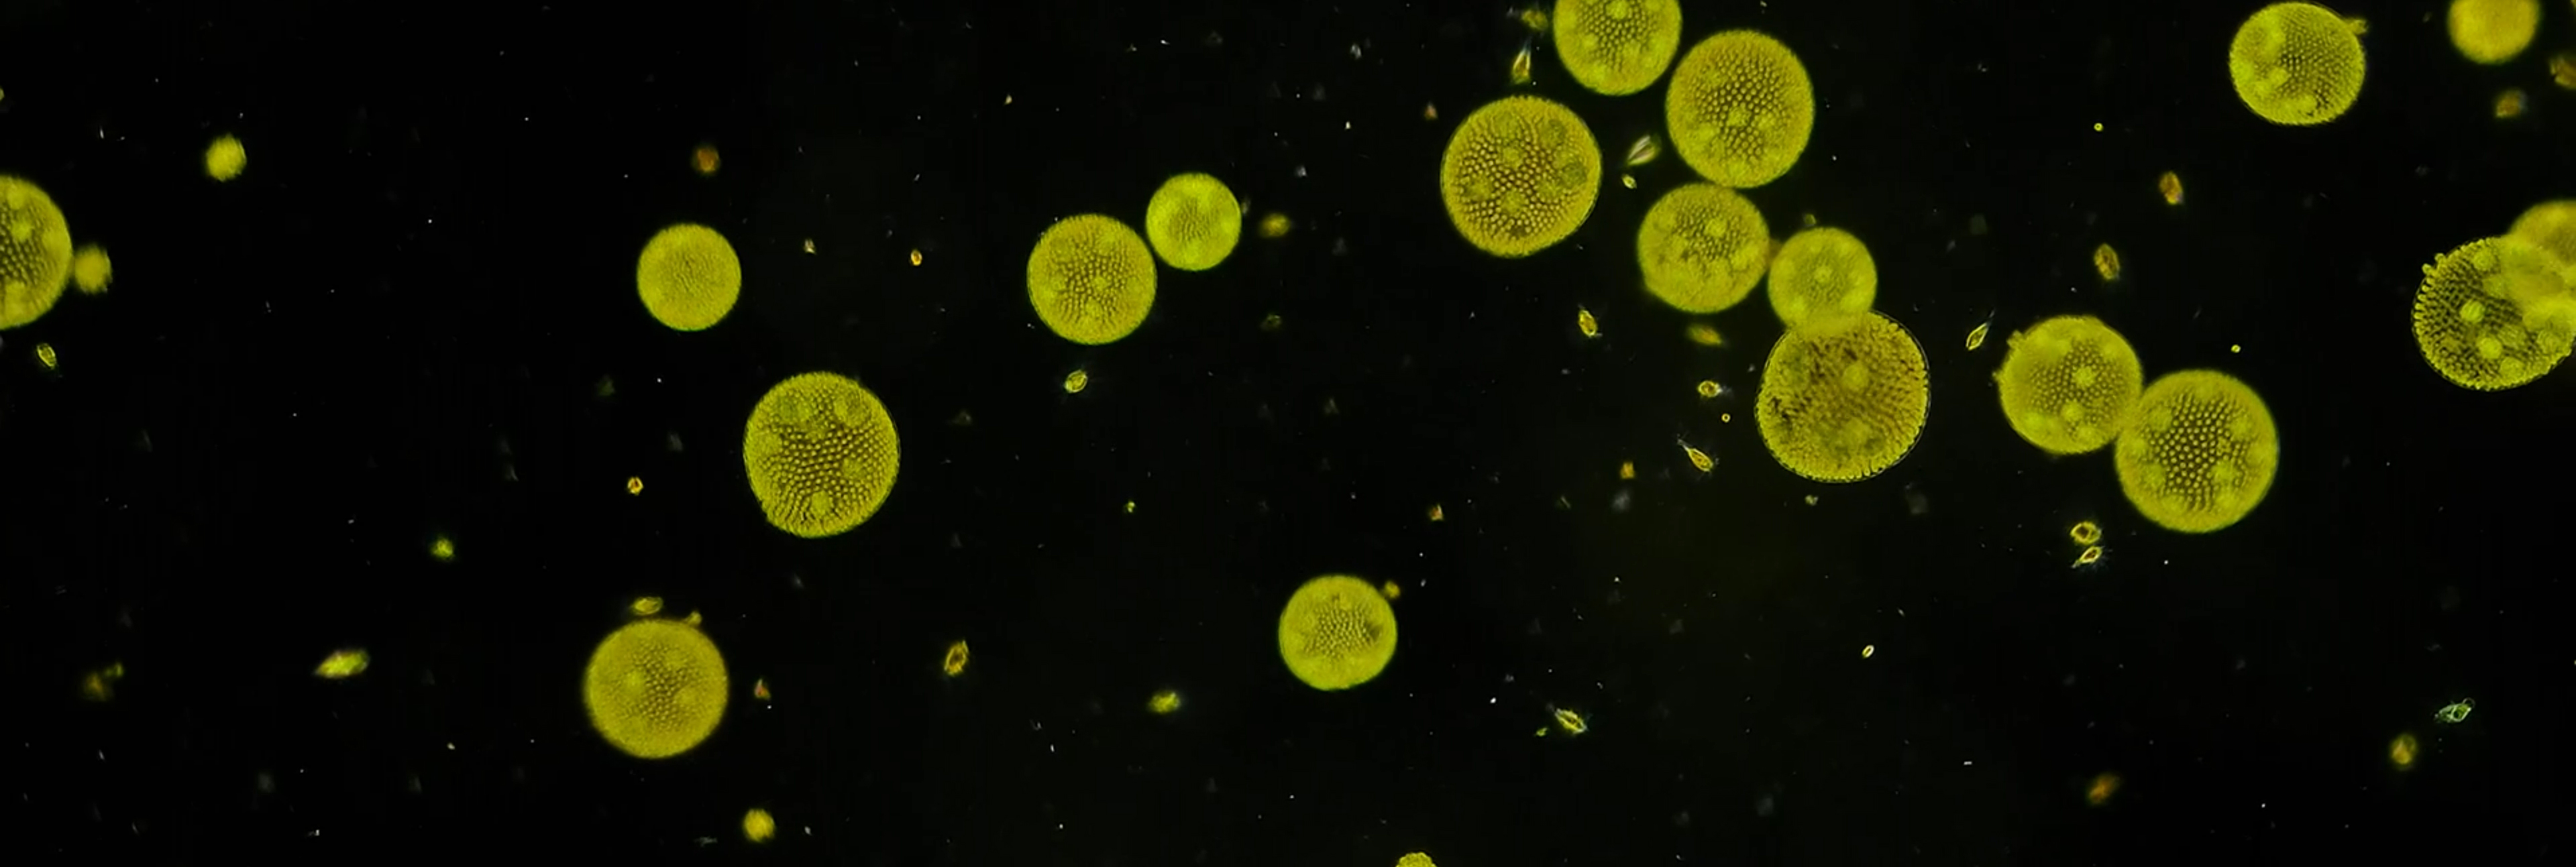 Yellow microbes on a black banner.